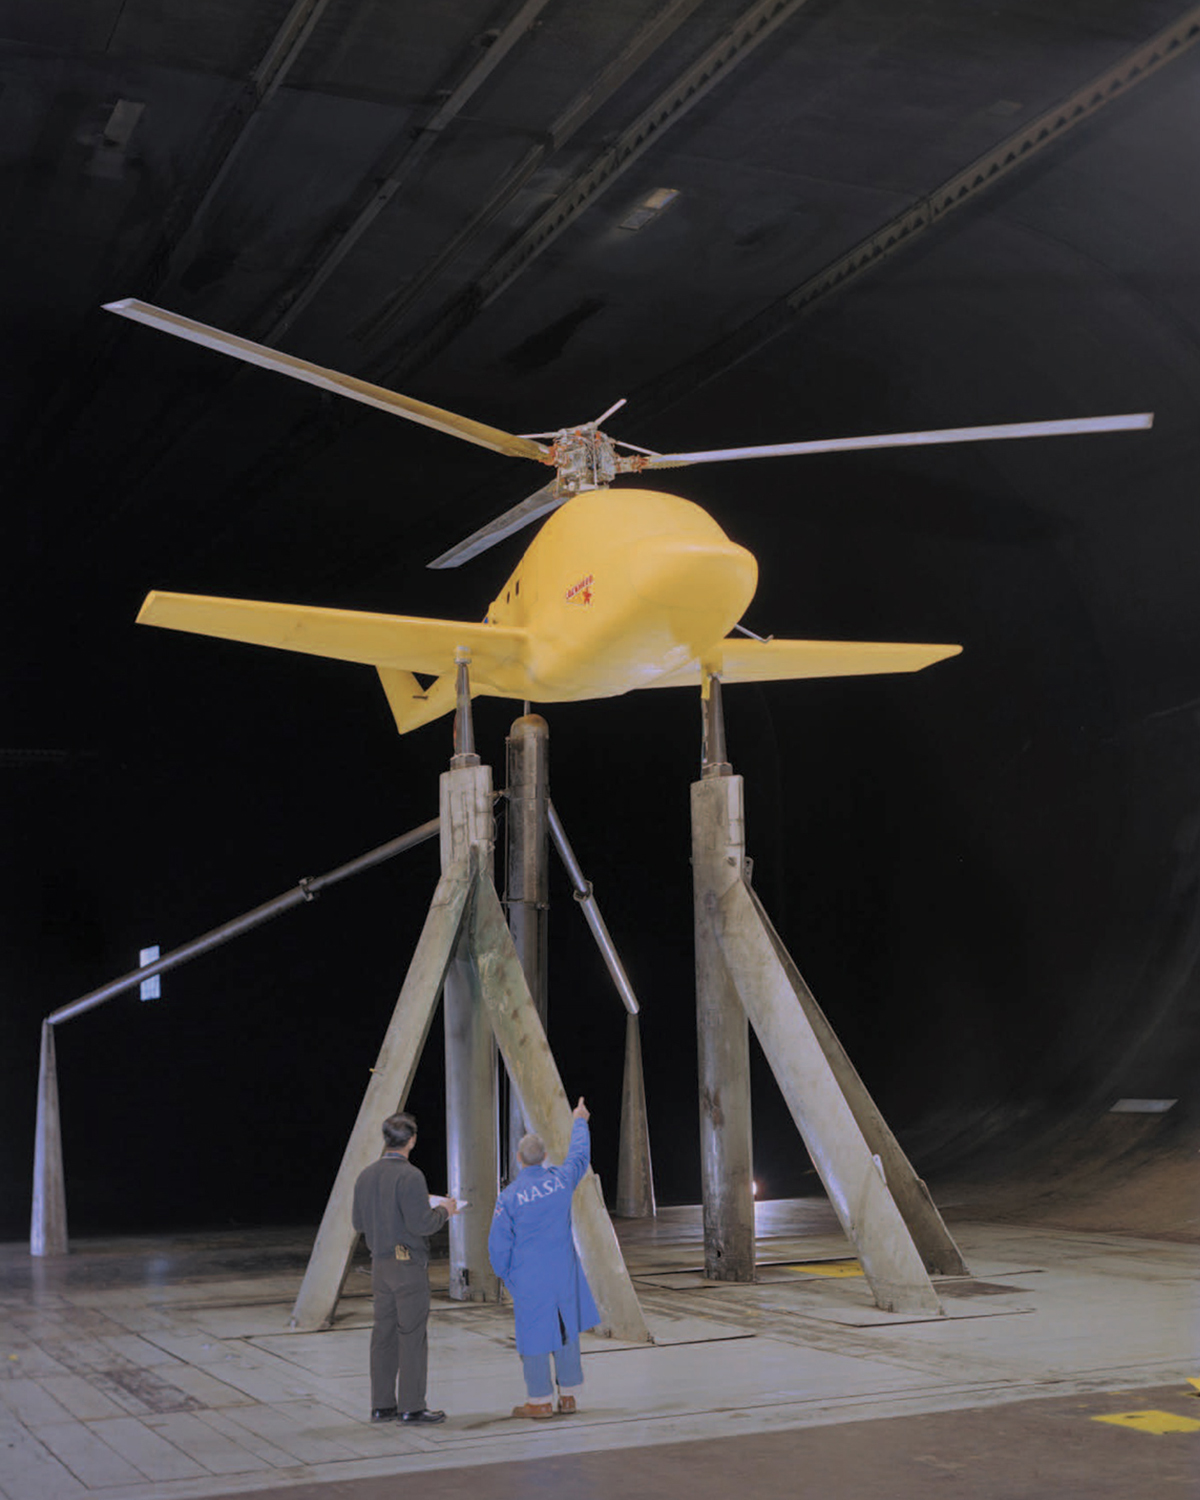 Two men, with their backs to the camera, look up at a yellow helicopter with wings that is raised above the floor on tall columns inside a wind tunnel.